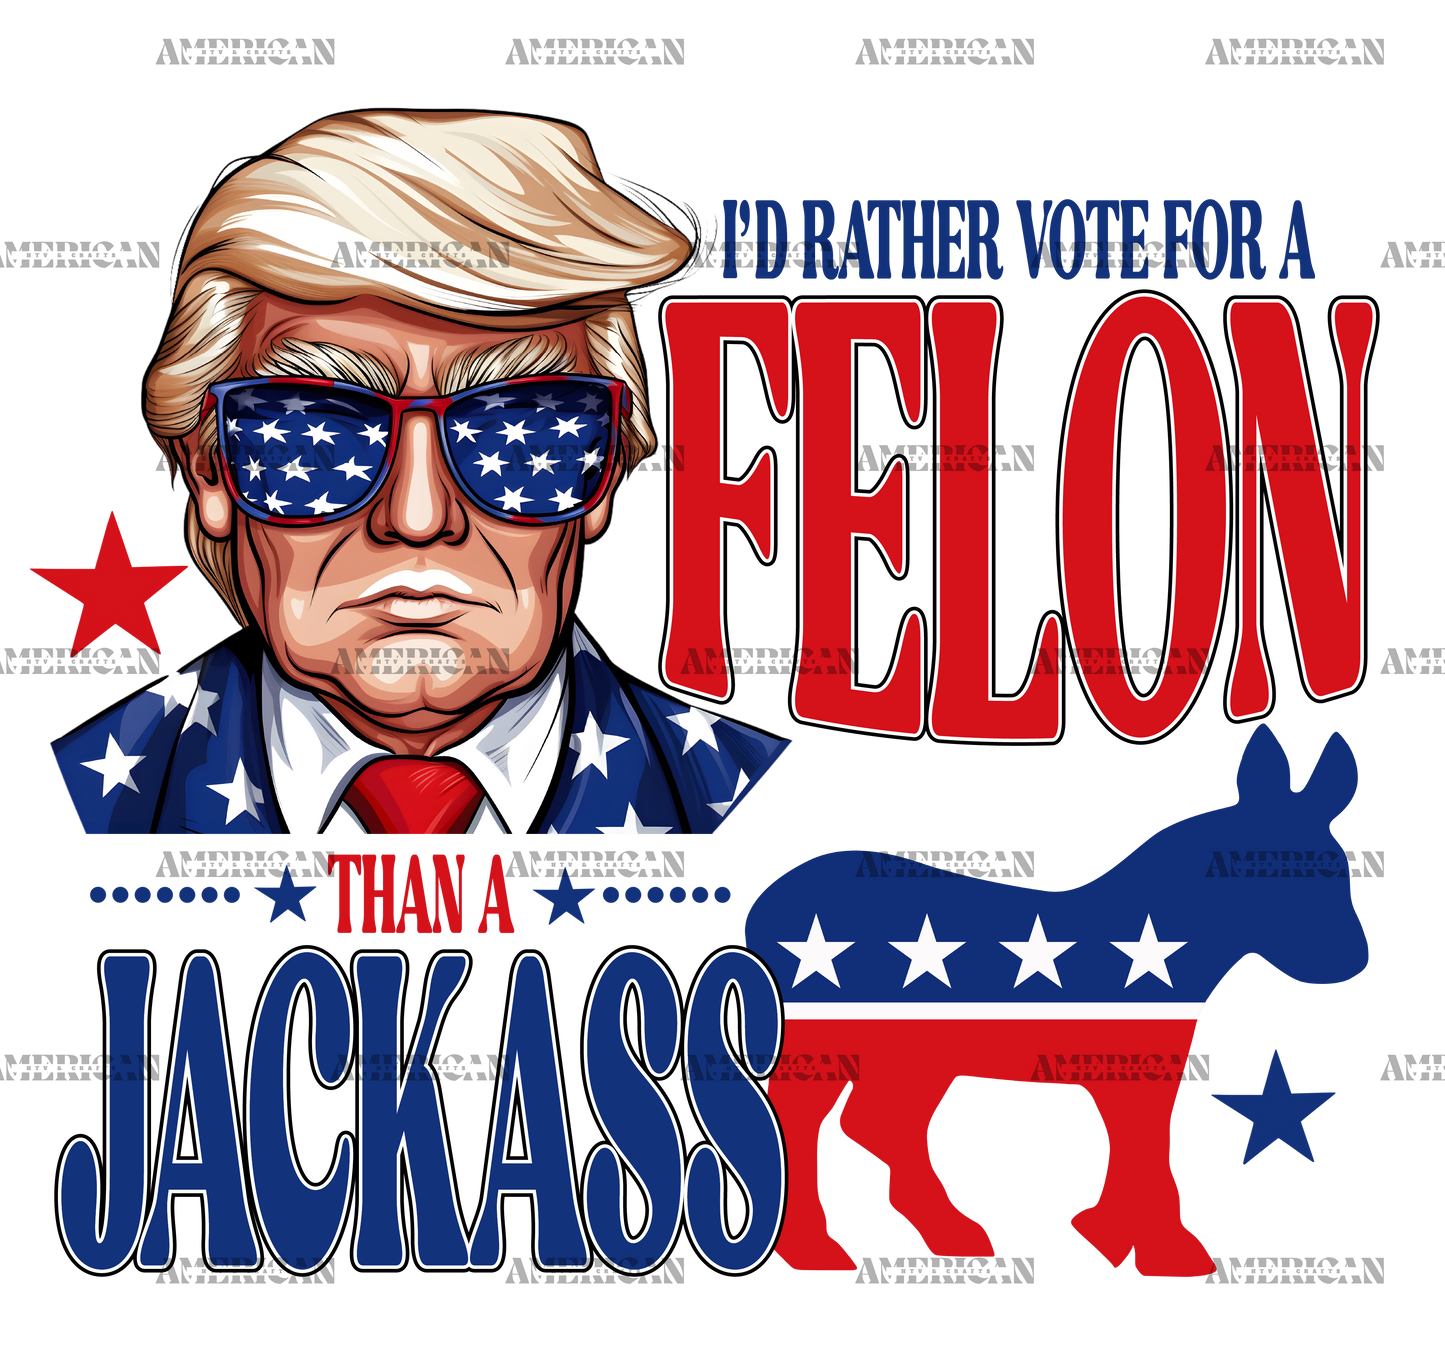 I'd Rather Vote For A Felon Than A Jackass-1 DTF Transfer